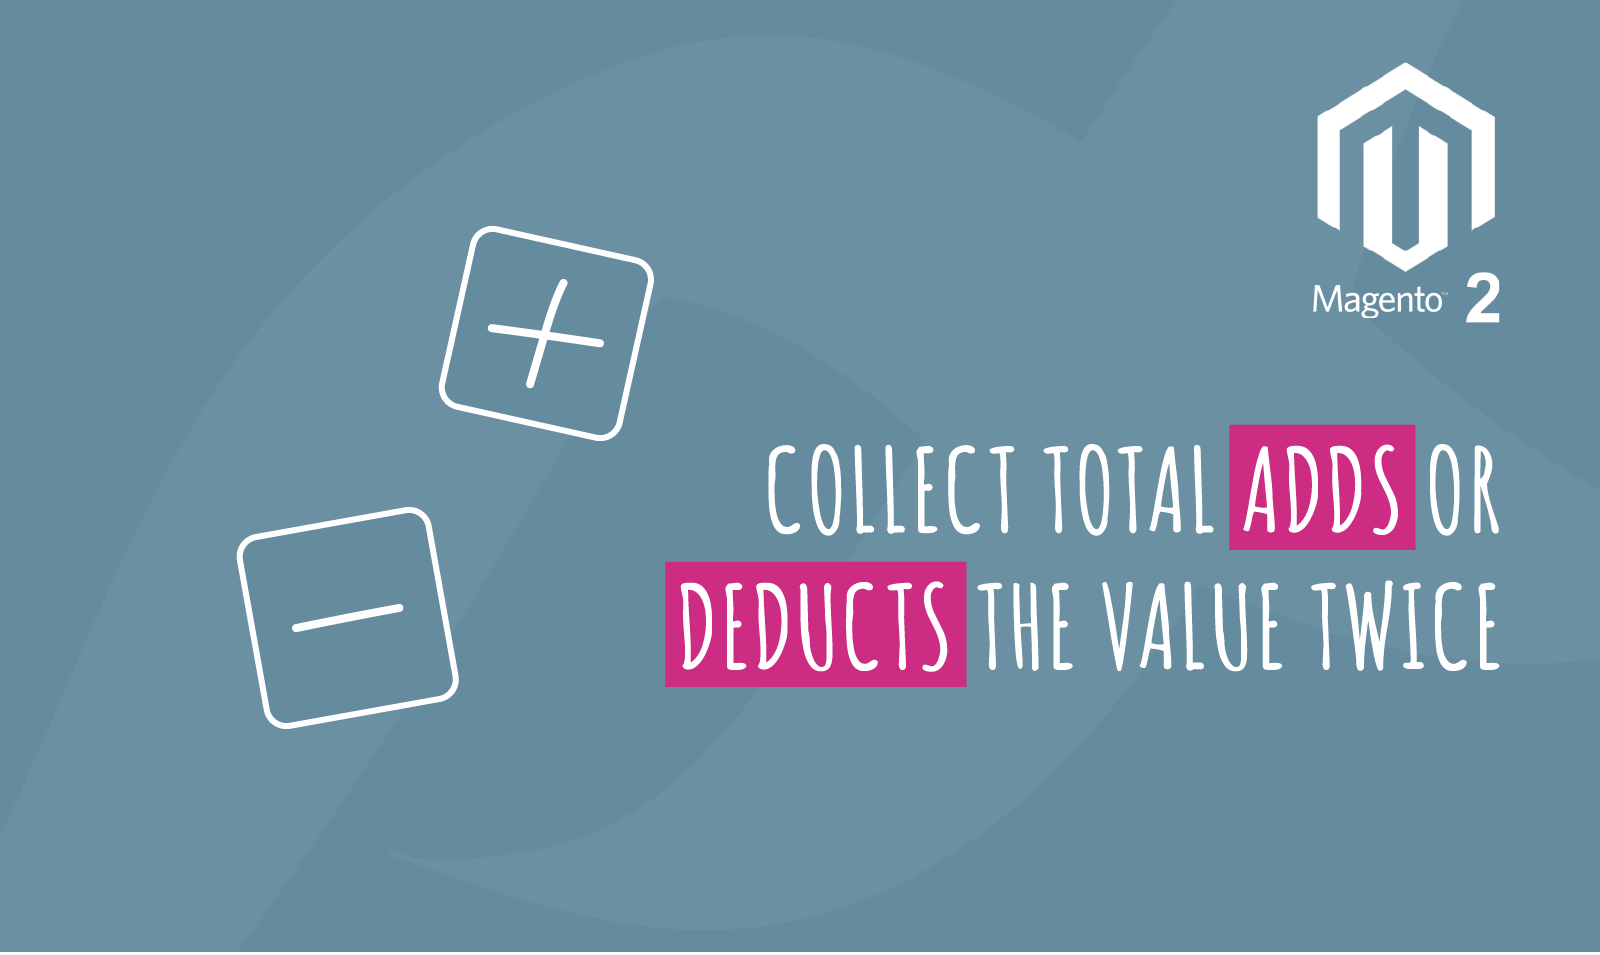 Magento 2 collect total adds or deducts the value twice